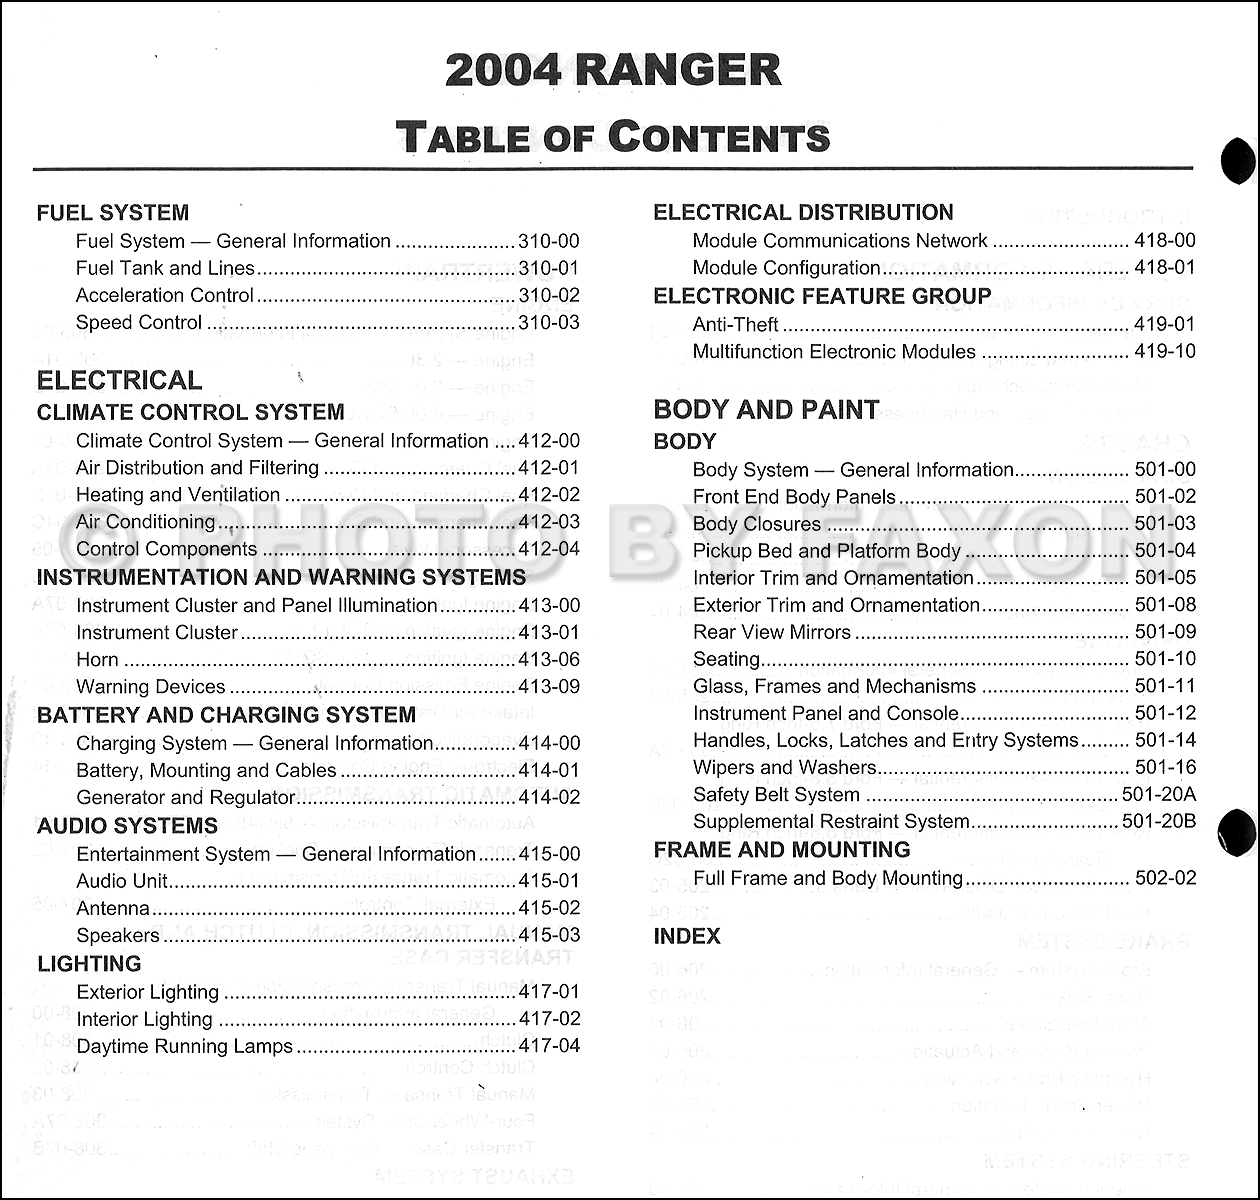 2004 Ford ranger edge owners manual pdf